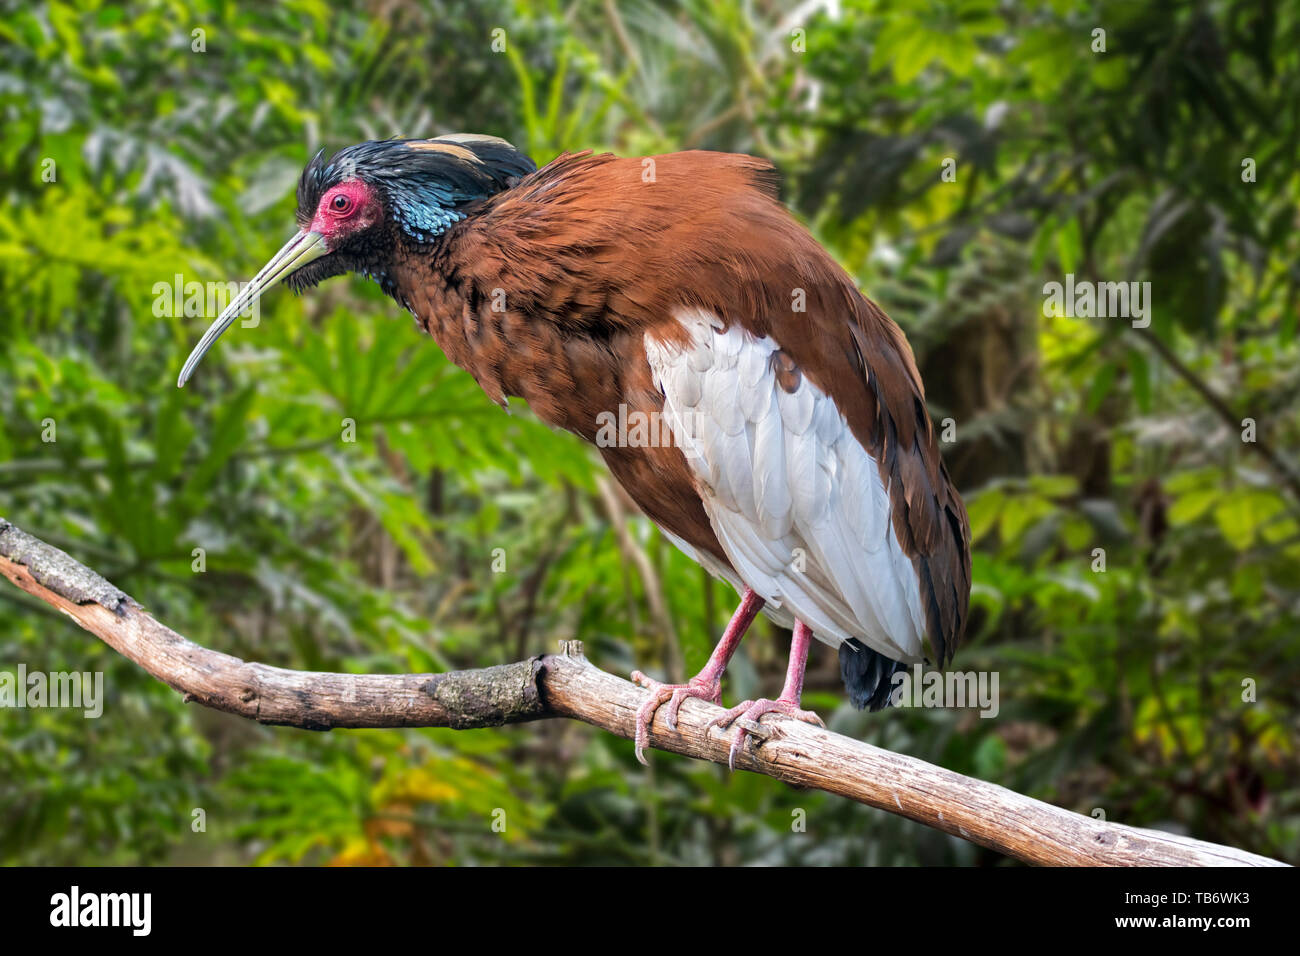 Madagascan ibis / Madagascar crested ibis / white-winged ibis / crested wood ibis (Lophotibis cristata) perched in tree, native to Madagascar, Africa Stock Photo